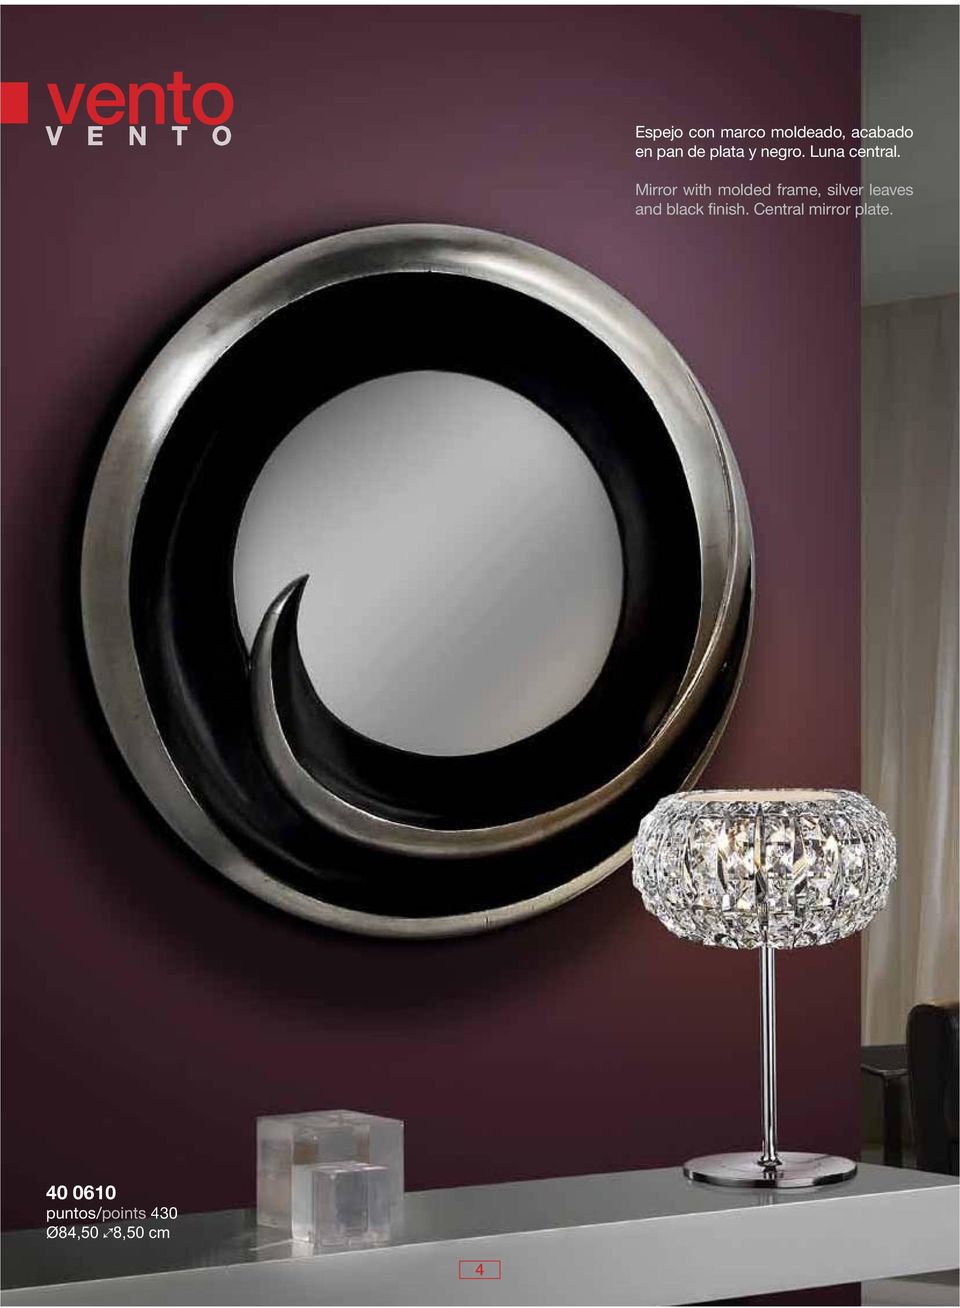 Mirror with molded frame, silver leaves and black